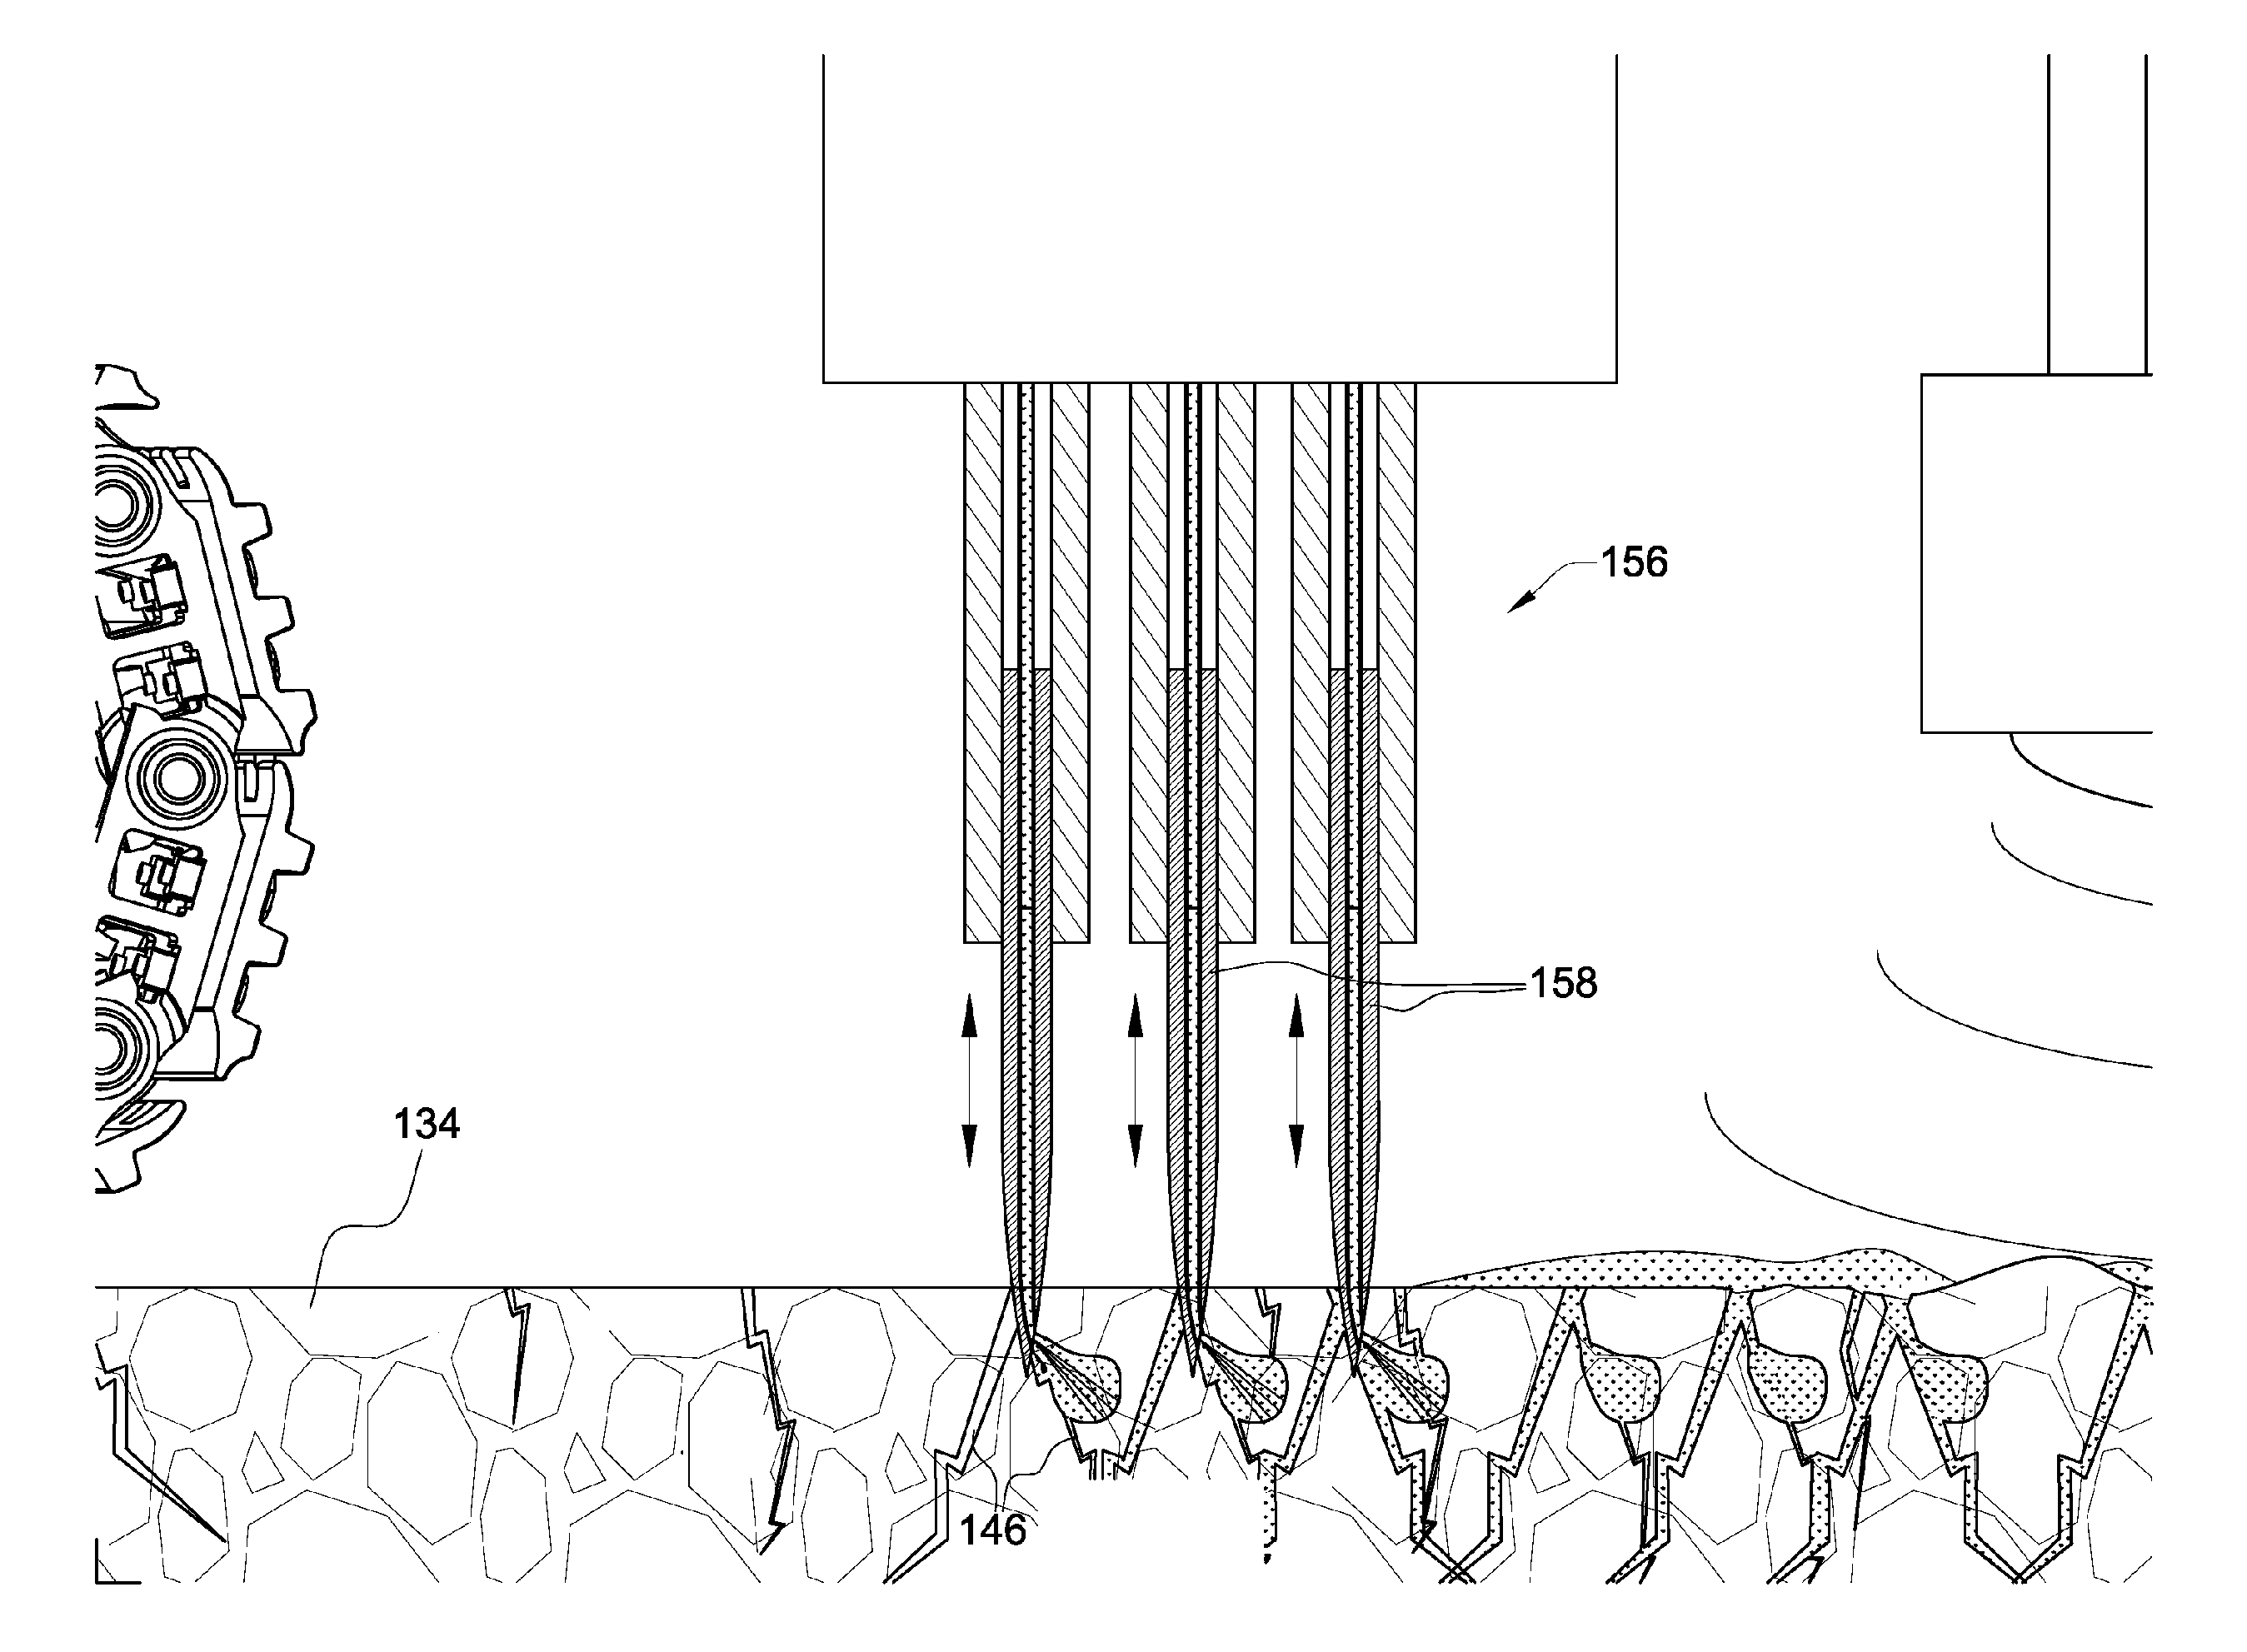 Apparatus and method for heating a paved surface with microwaves